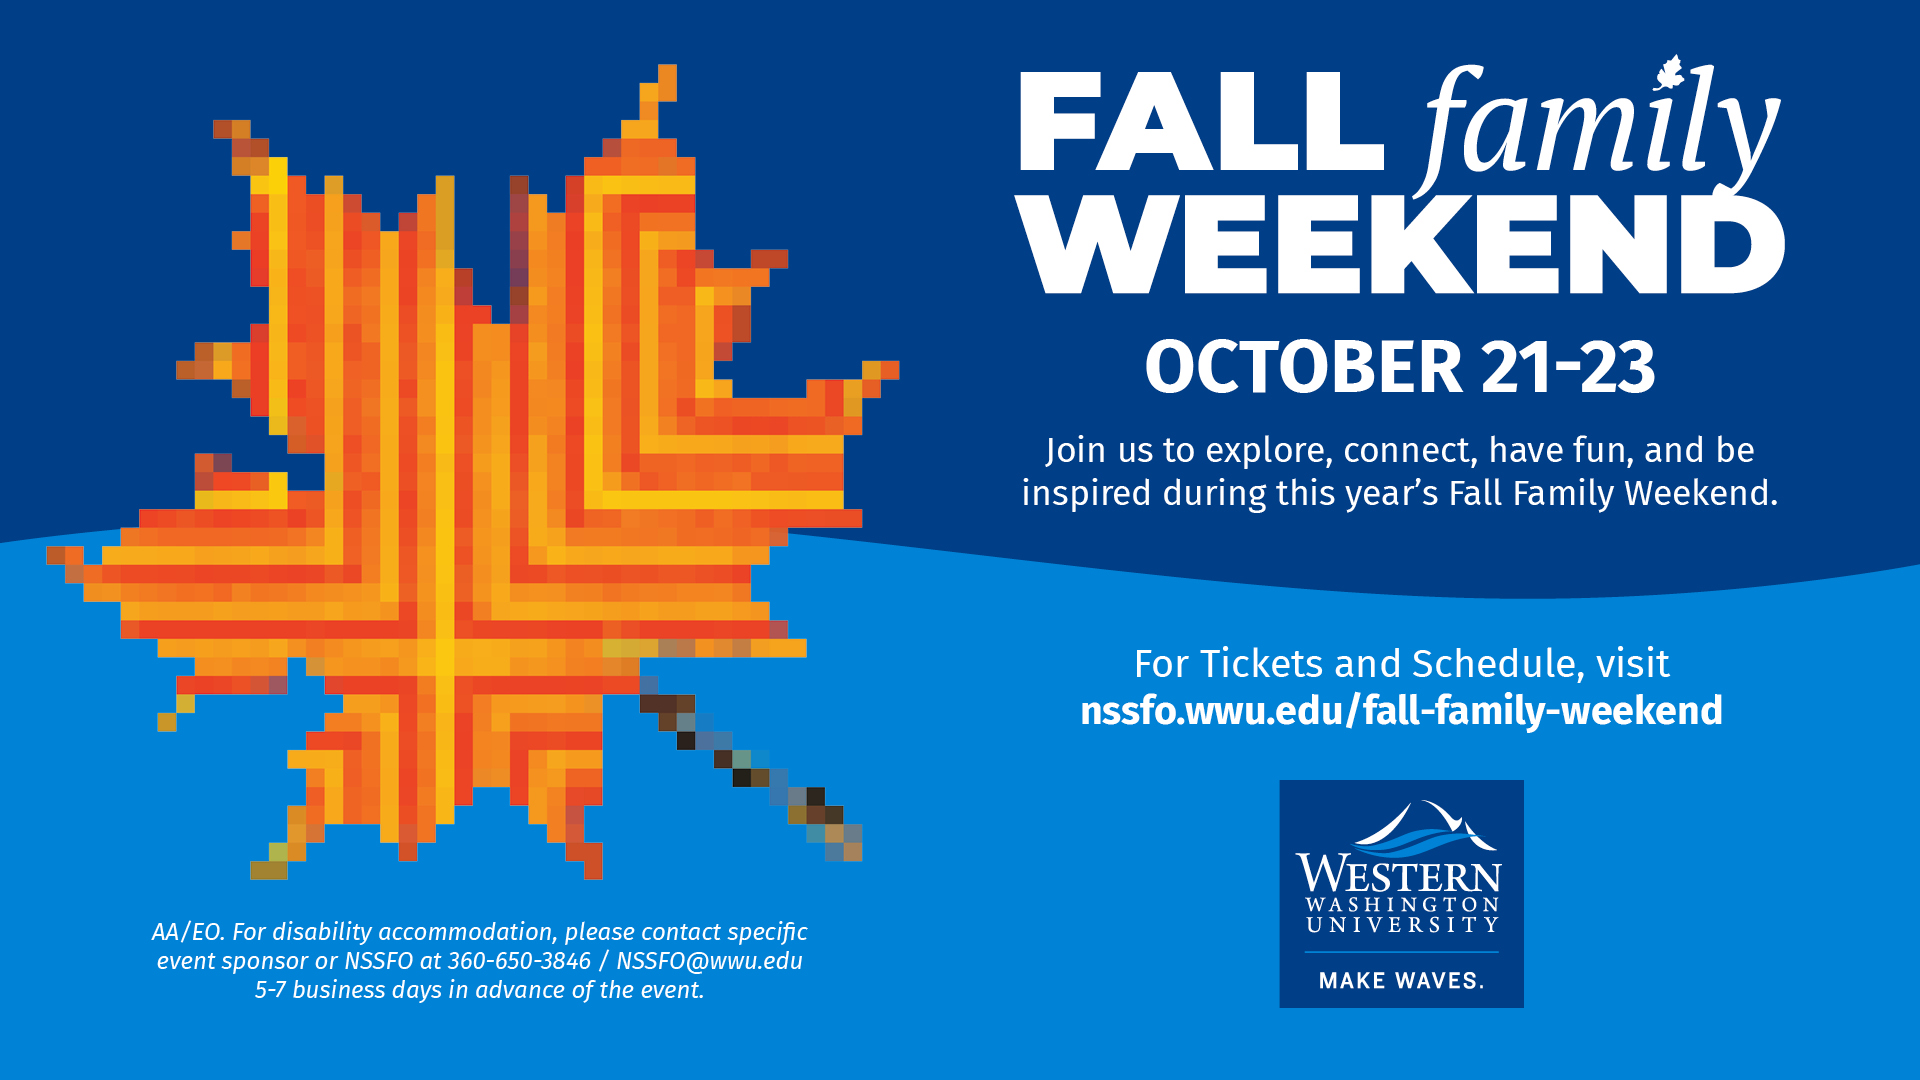 WWU Fall Family Weekend Schedule of Events Available Now Events